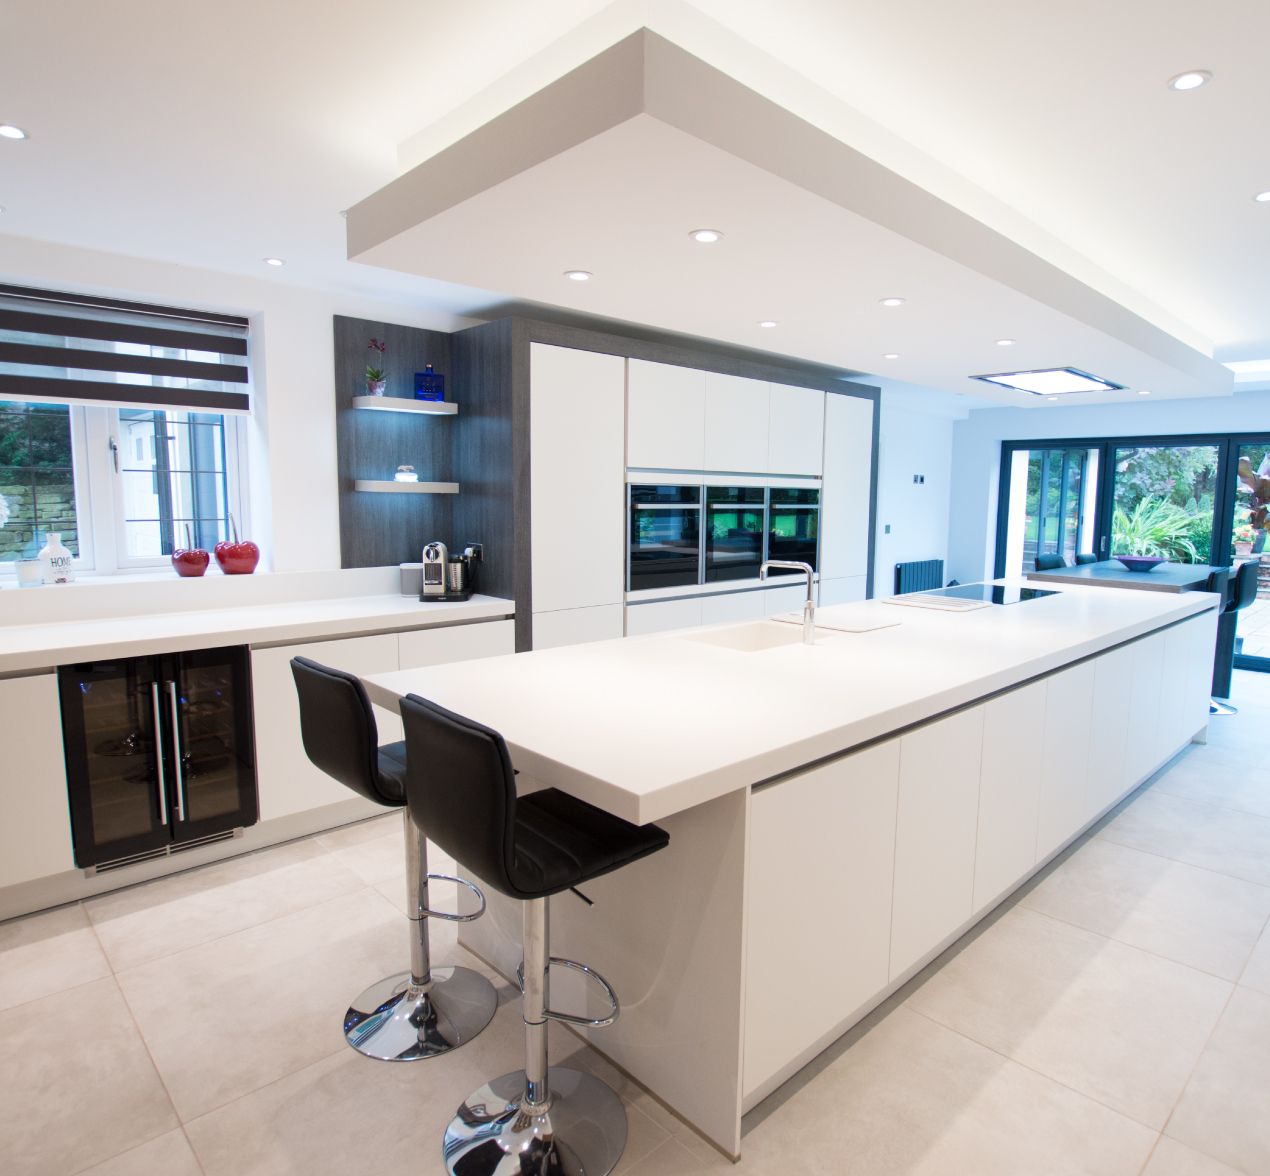 The Contemporary Family Kitchen